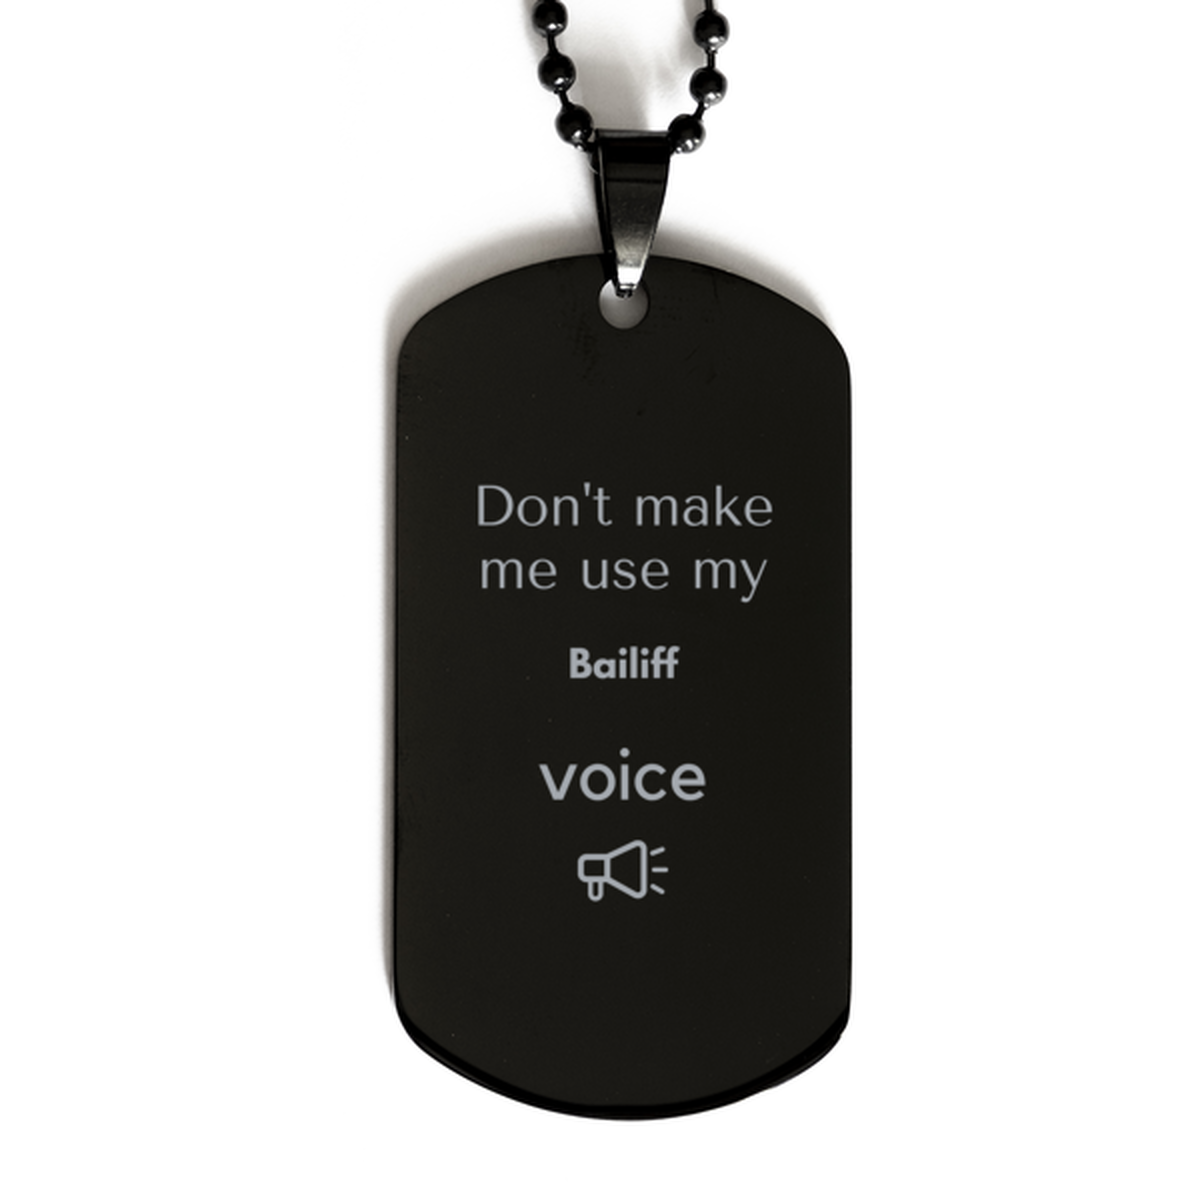 Don't make me use my Bailiff voice, Sarcasm Bailiff Gifts, Christmas Bailiff Black Dog Tag Birthday Unique Gifts For Bailiff Coworkers, Men, Women, Colleague, Friends